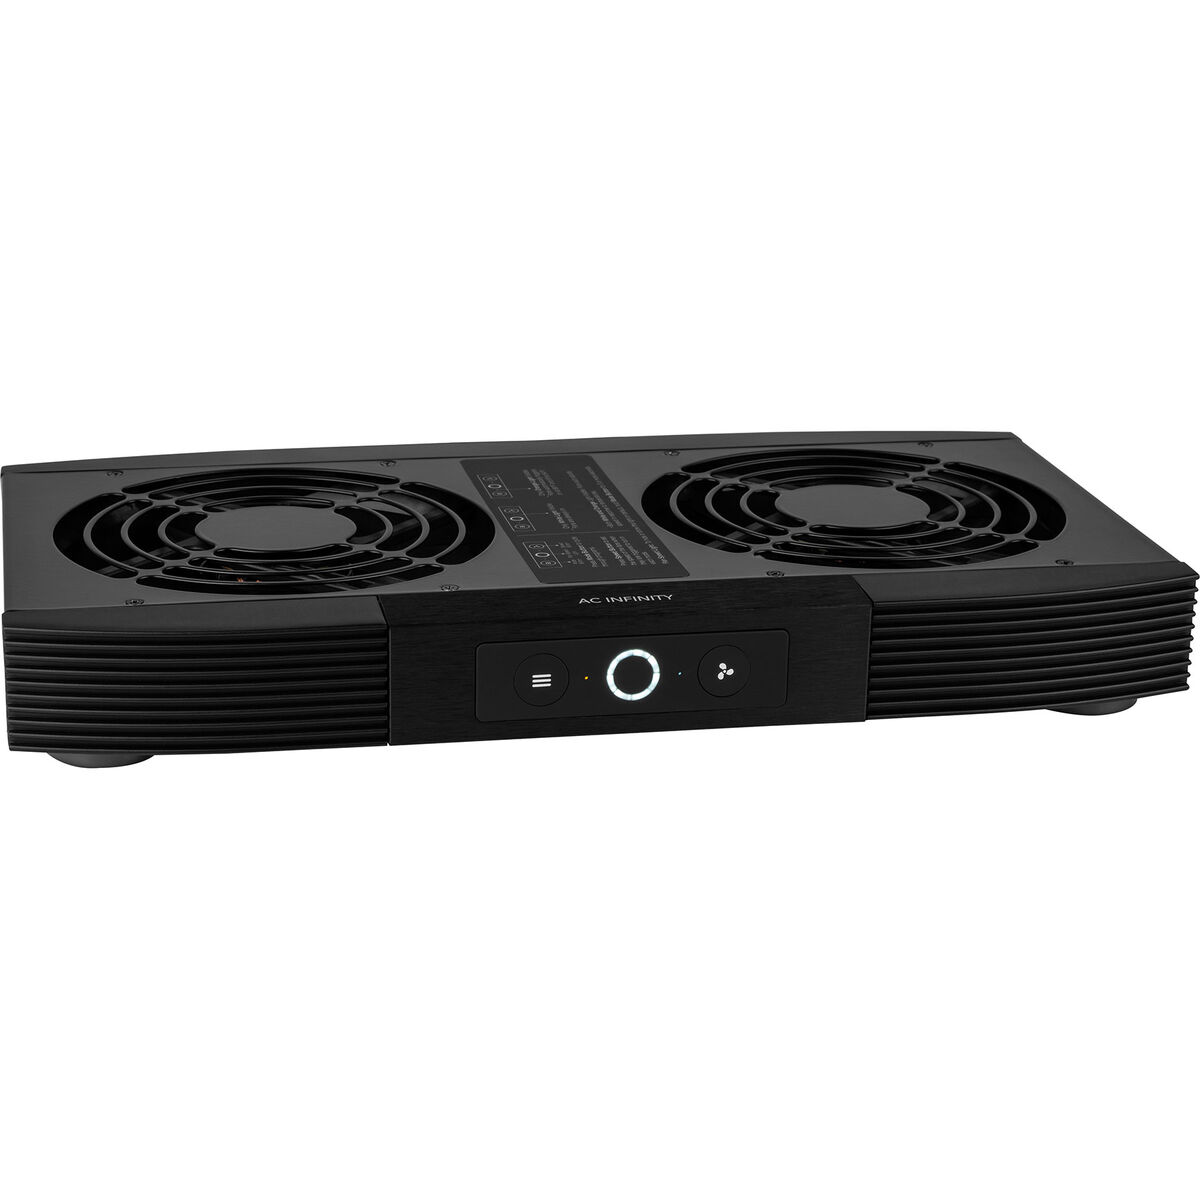 AC Infinity Aircom S7, Quiet Cooling Fan System 12 Top-Exhaust for Receivers, Amps, DVR, AV Cabinet Components